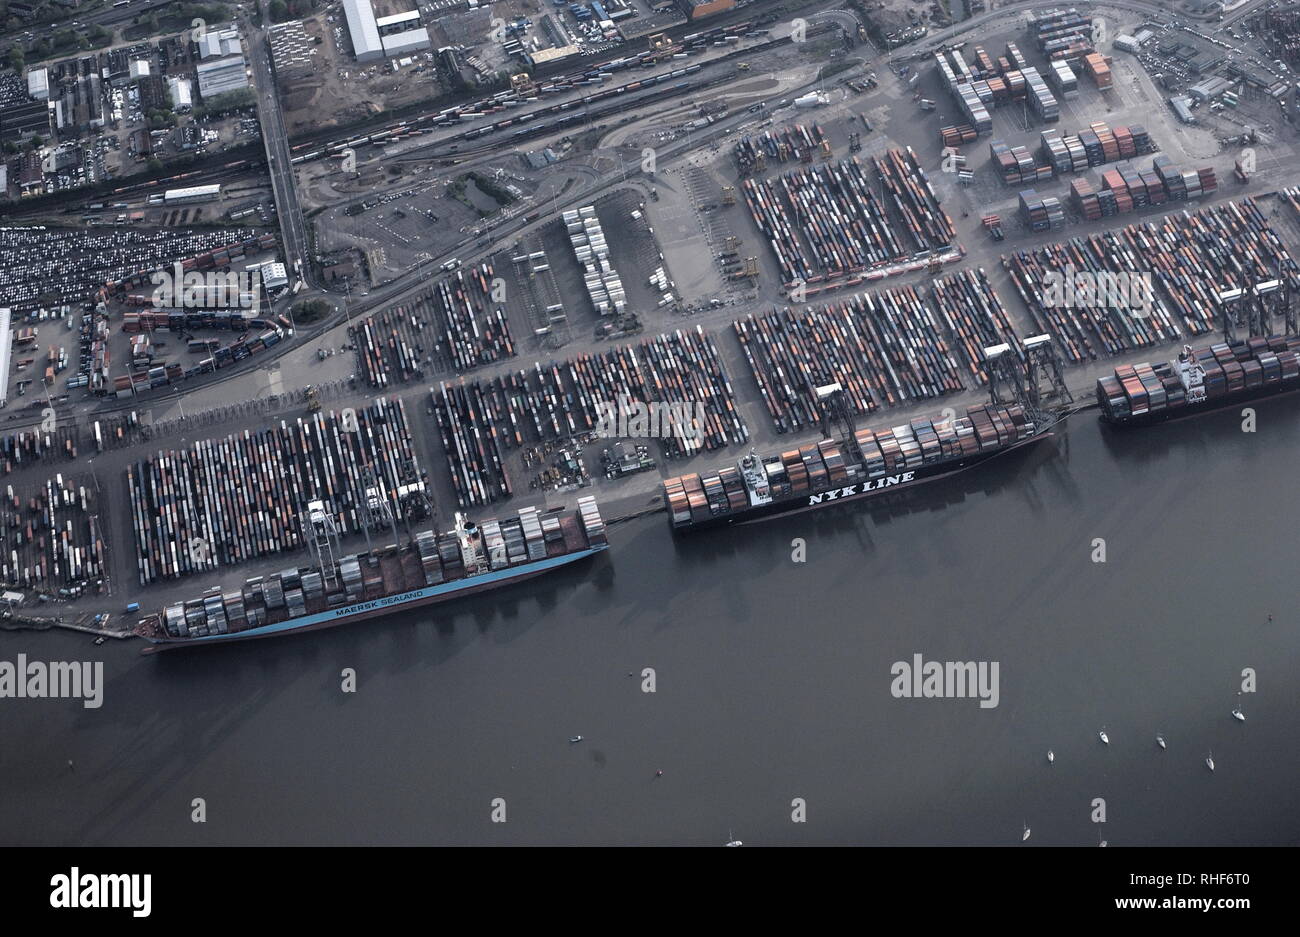 AJAXNETPHOTO. 2008. SOUTHAMPTON, ENGLAND. - WESTERN DOCKS - AERIAL VIEW OF WESTERN DOCKS CONTAINER SHIPPING PORT WITH CONTAINER SHIPS MOORED ALONGSIDE. PHOTO:JONATHAN EASTLAND/AJAX REF:D80105 644 Stock Photo